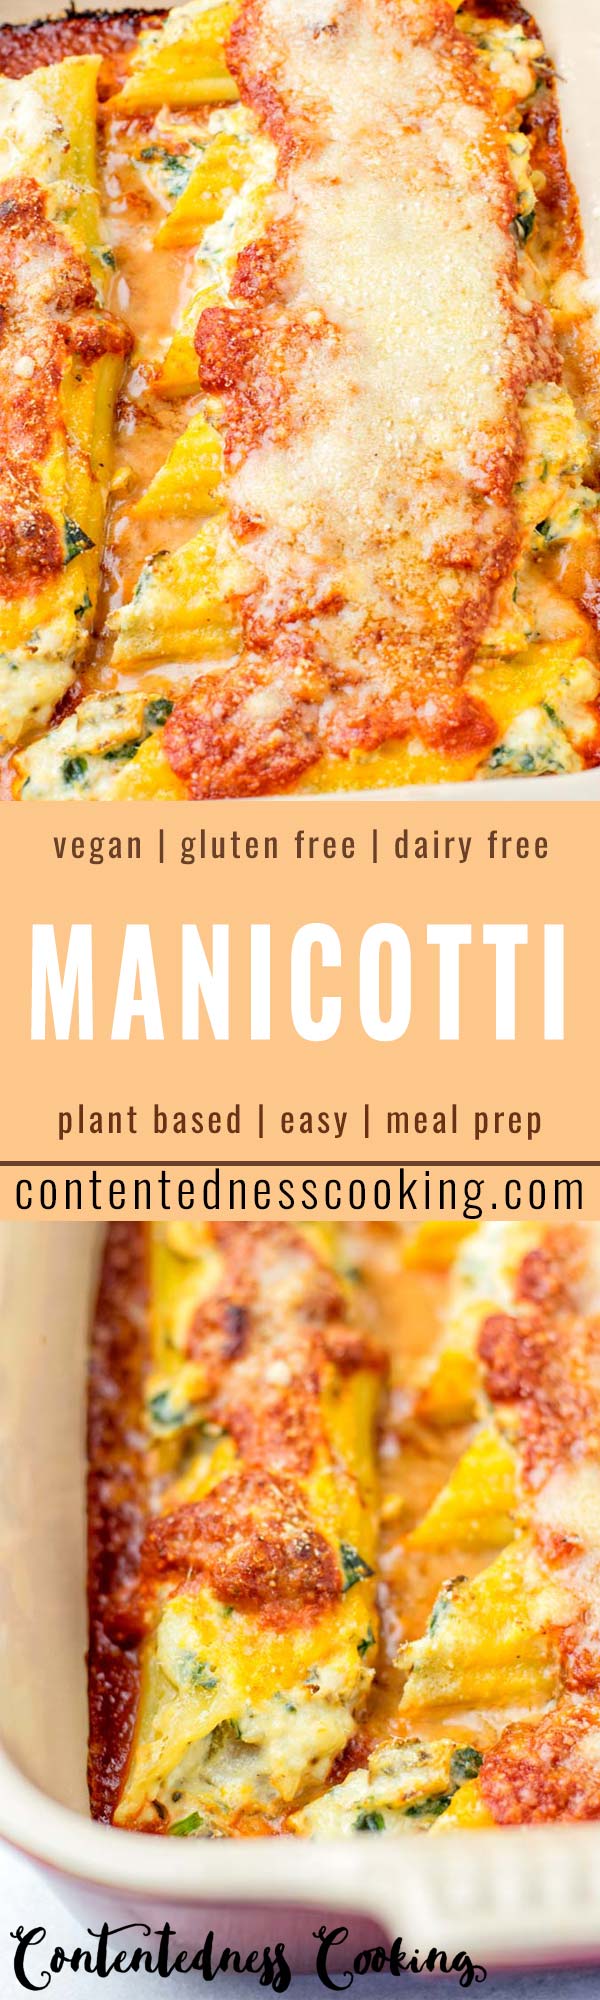 This Manicotti recipe is the only one you need and want to make for lunch or dinner at any time. It is the ultimate comfort food that the whole family will love. #vegan #dairyfree #glutenfree #vegetarian #contentednesscooking #manicottirecipe #comfortfood #mealprep #dinner #lunch #familymeals